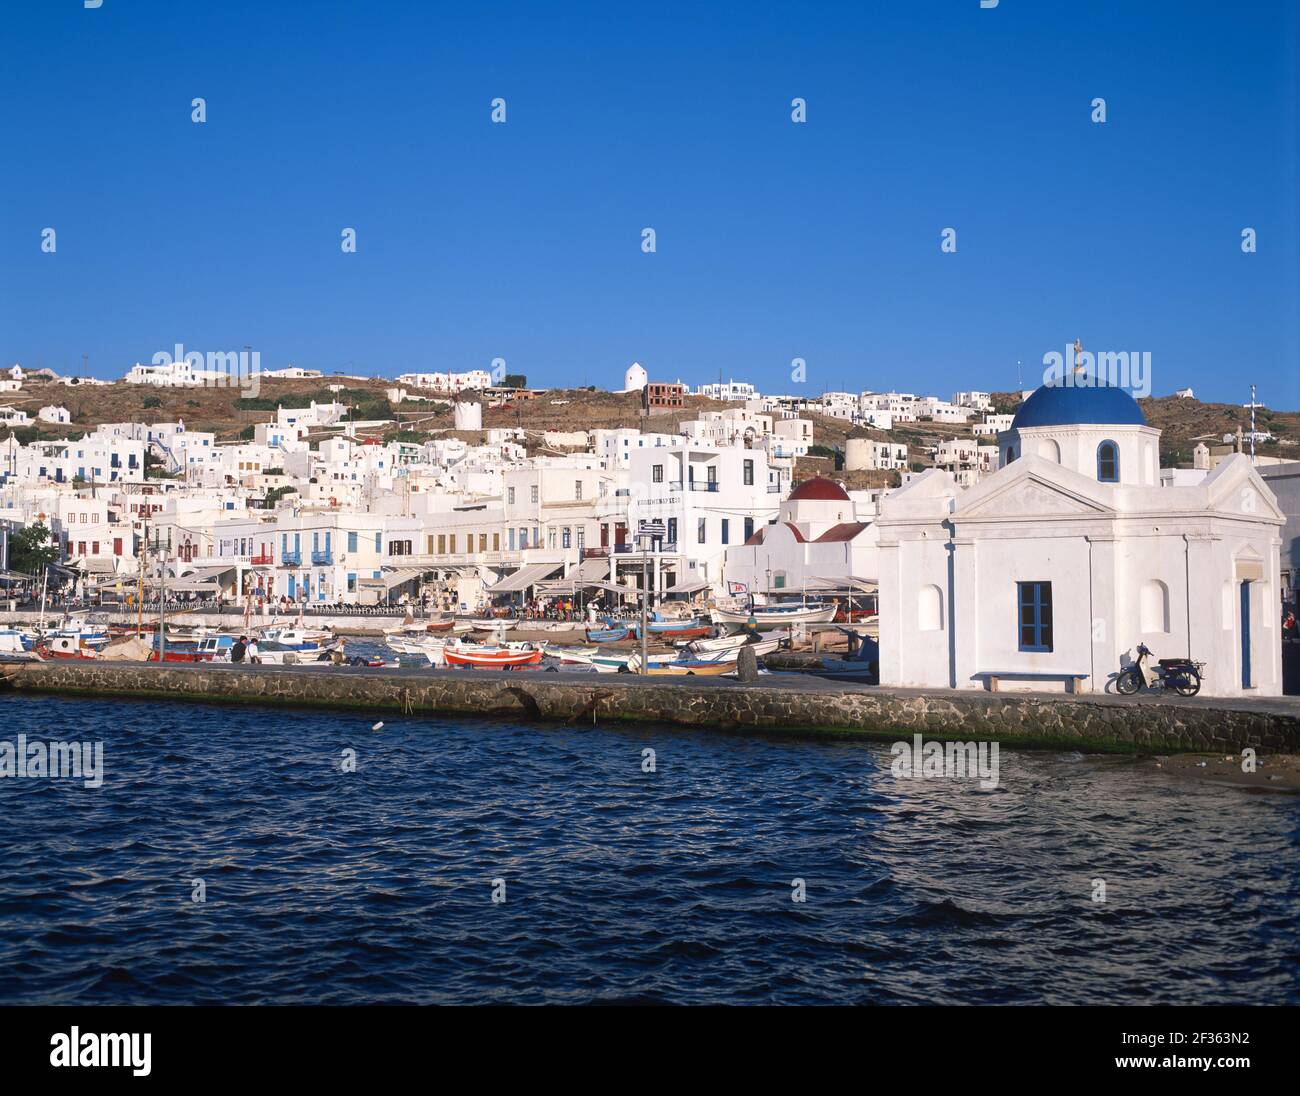 Greece, Cyclades Islands, Mykonos, Harbour and Port. Stock Photo